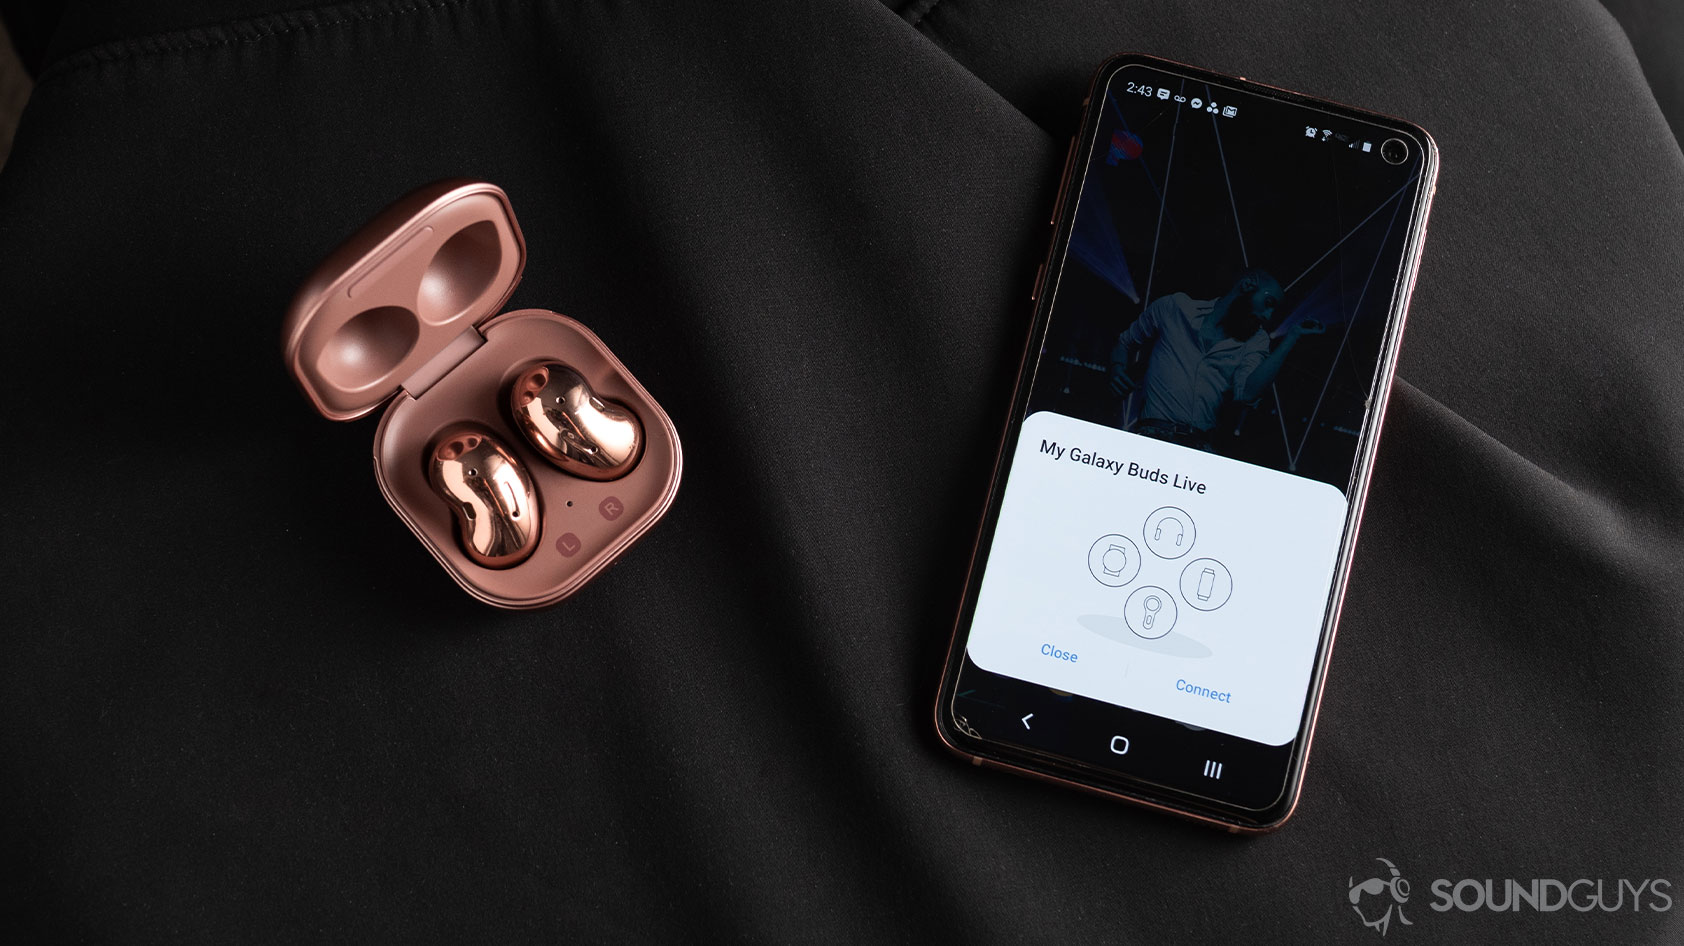 SAMSUNG Galaxy Buds Live True Wireless Bluetooth Earbuds w/ Active Noise  Cancelling, Charging Case, AKG Tuned 12mm Speaker, Long Battery Life, US